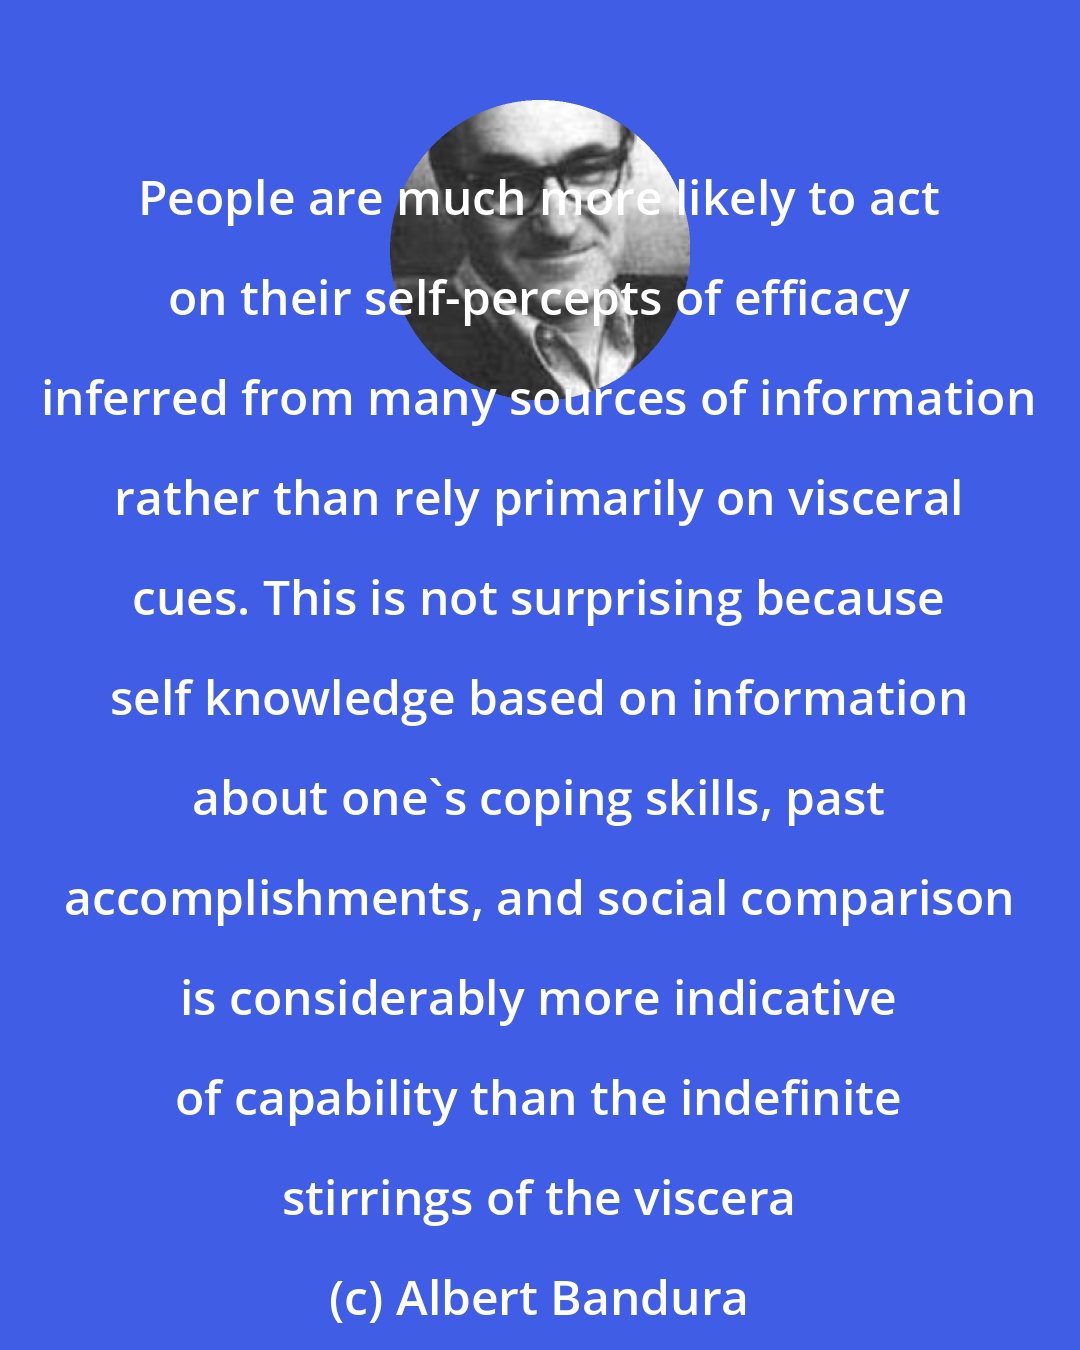 Albert Bandura: People are much more likely to act on their self-percepts of efficacy inferred from many sources of information rather than rely primarily on visceral cues. This is not surprising because self knowledge based on information about one's coping skills, past accomplishments, and social comparison is considerably more indicative of capability than the indefinite stirrings of the viscera